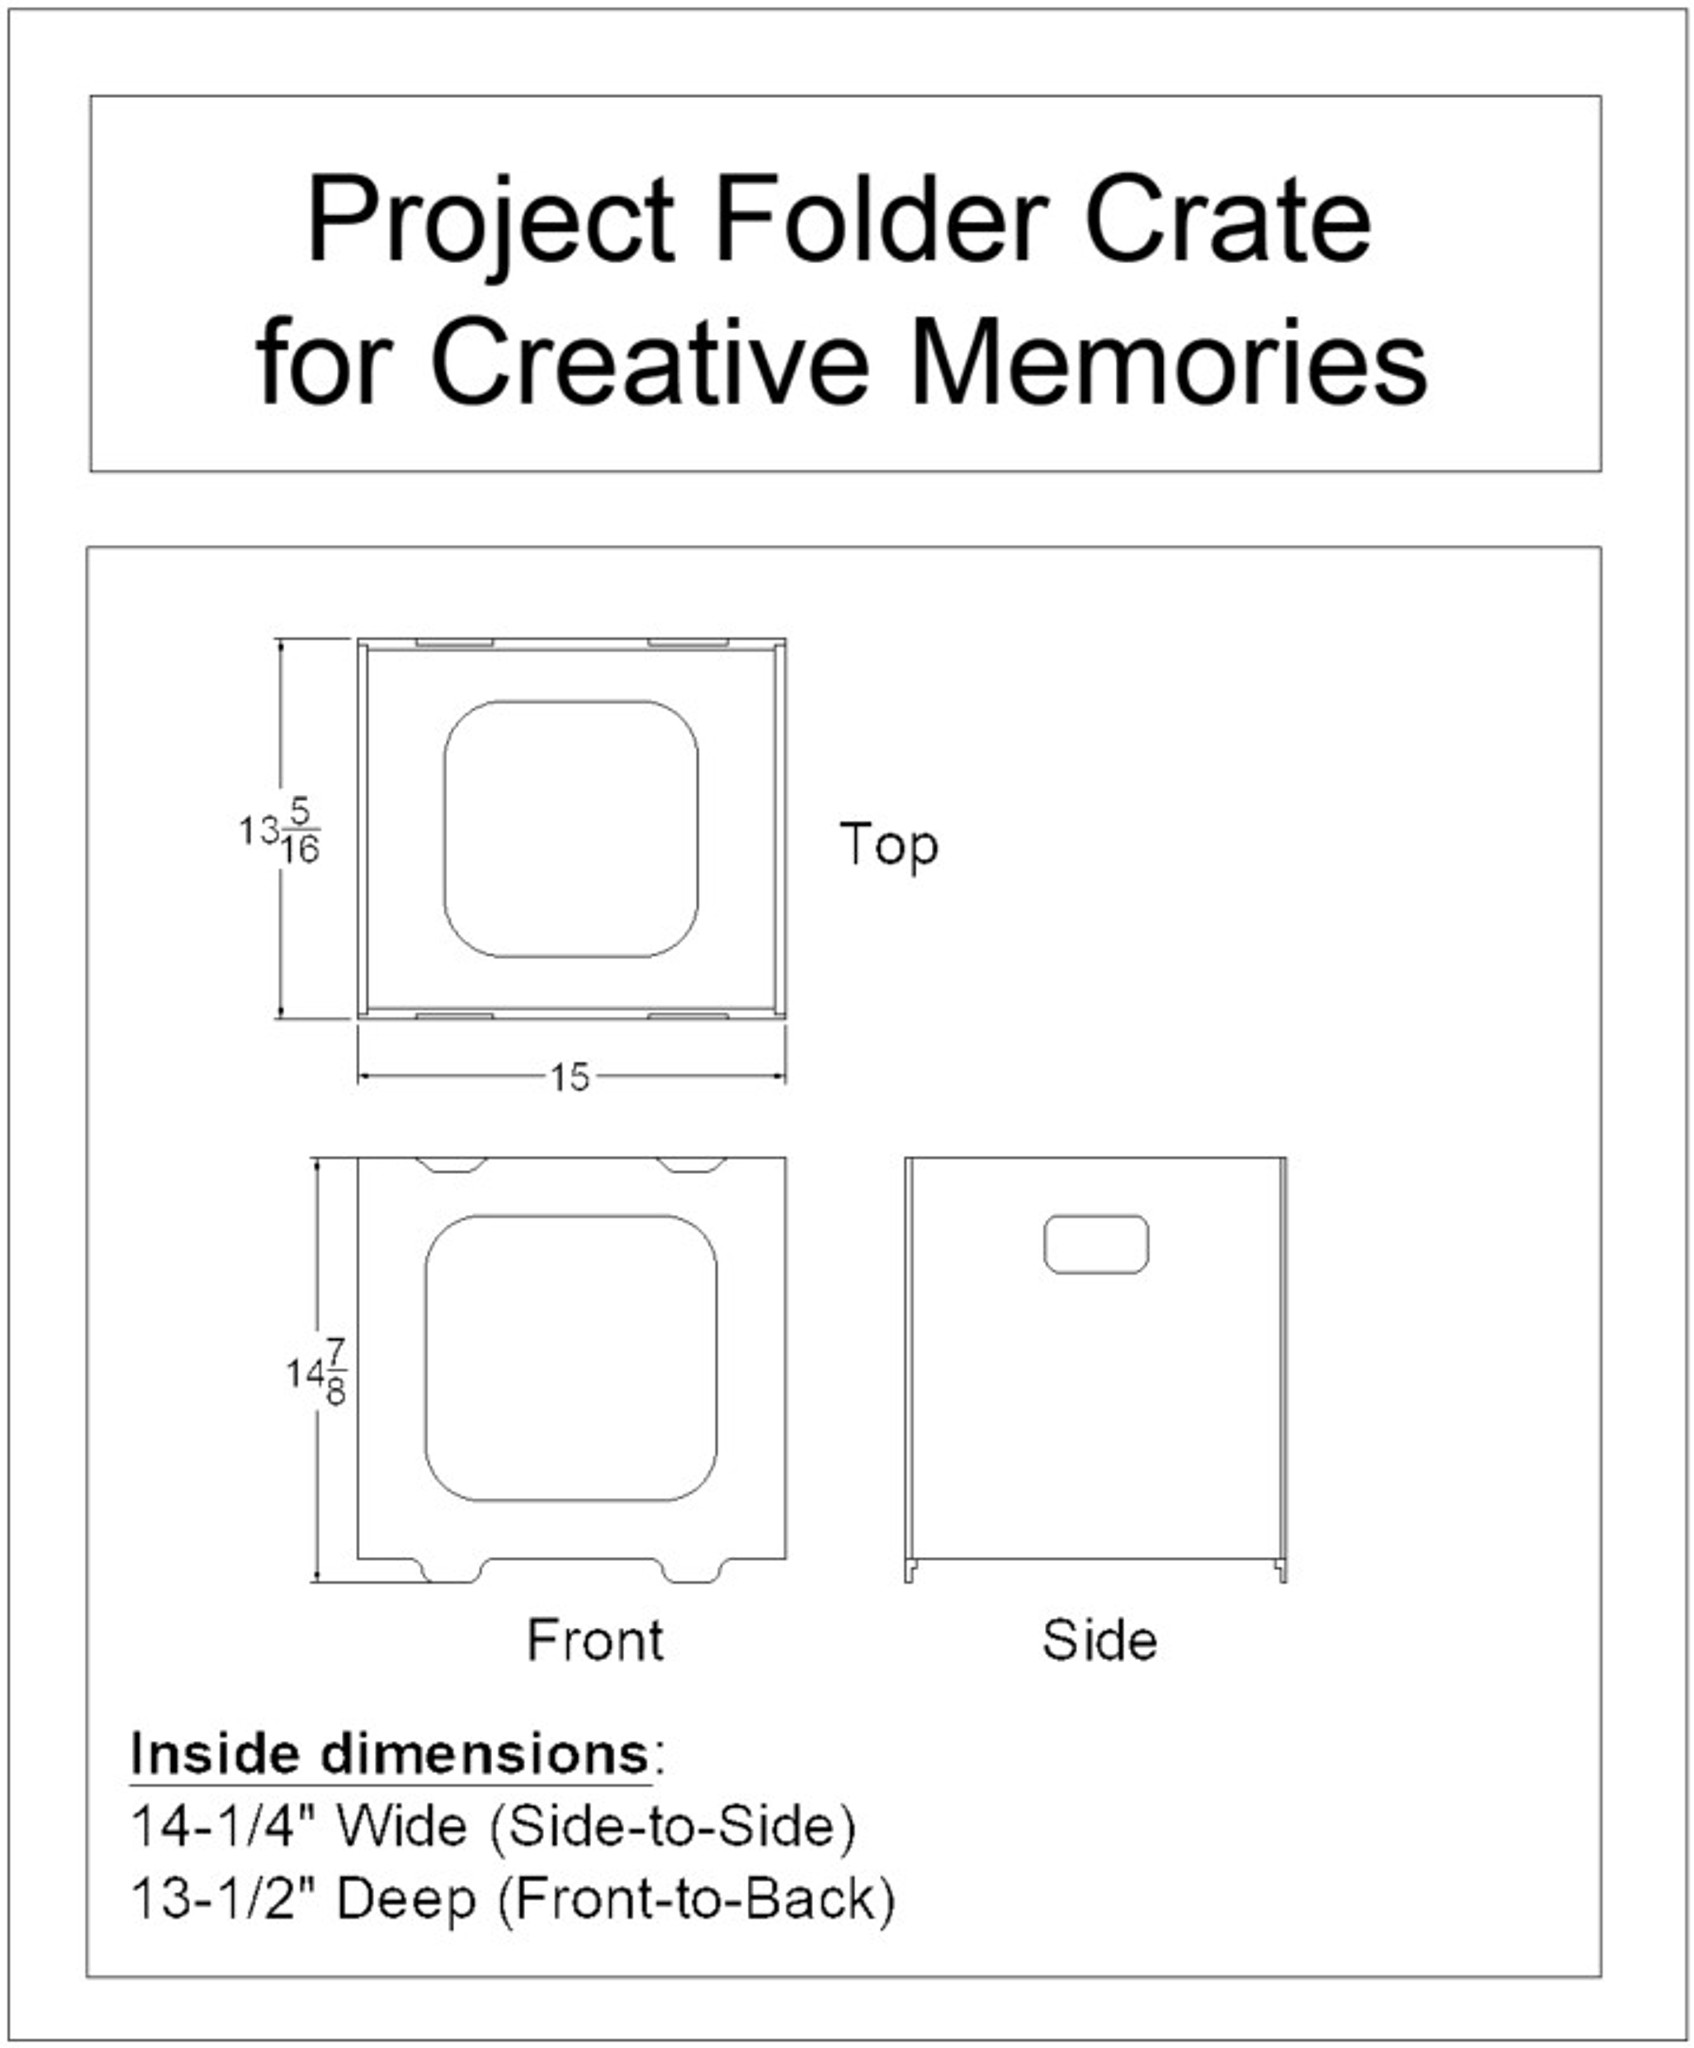 Project Folder Crate for Creative Memories